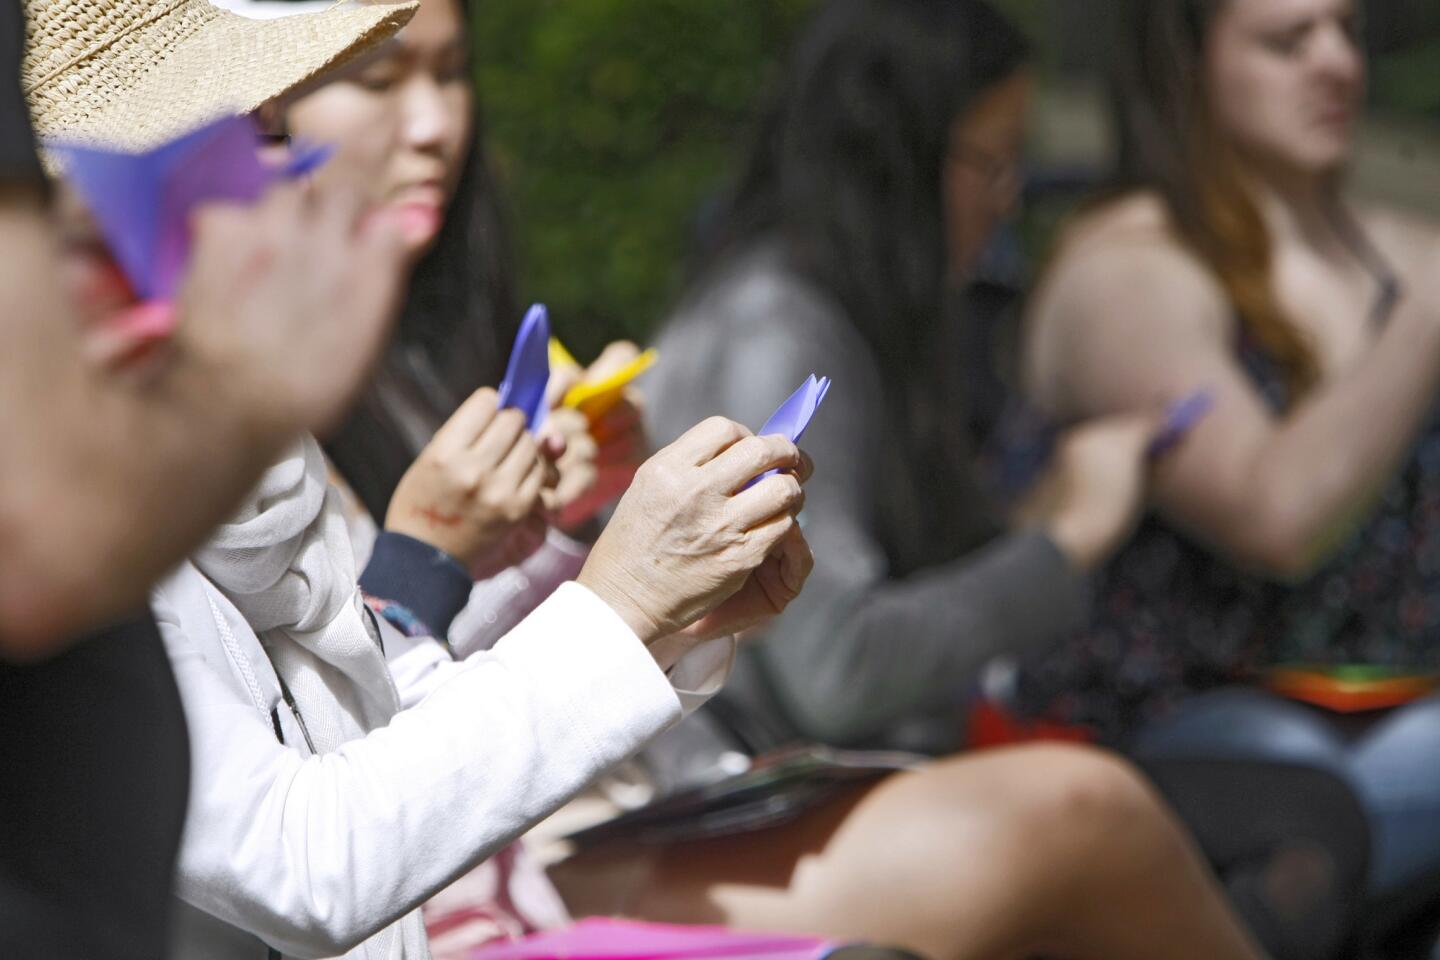 Photo Gallery: Annual Cherry Blossom Festival at Descanso Gardens